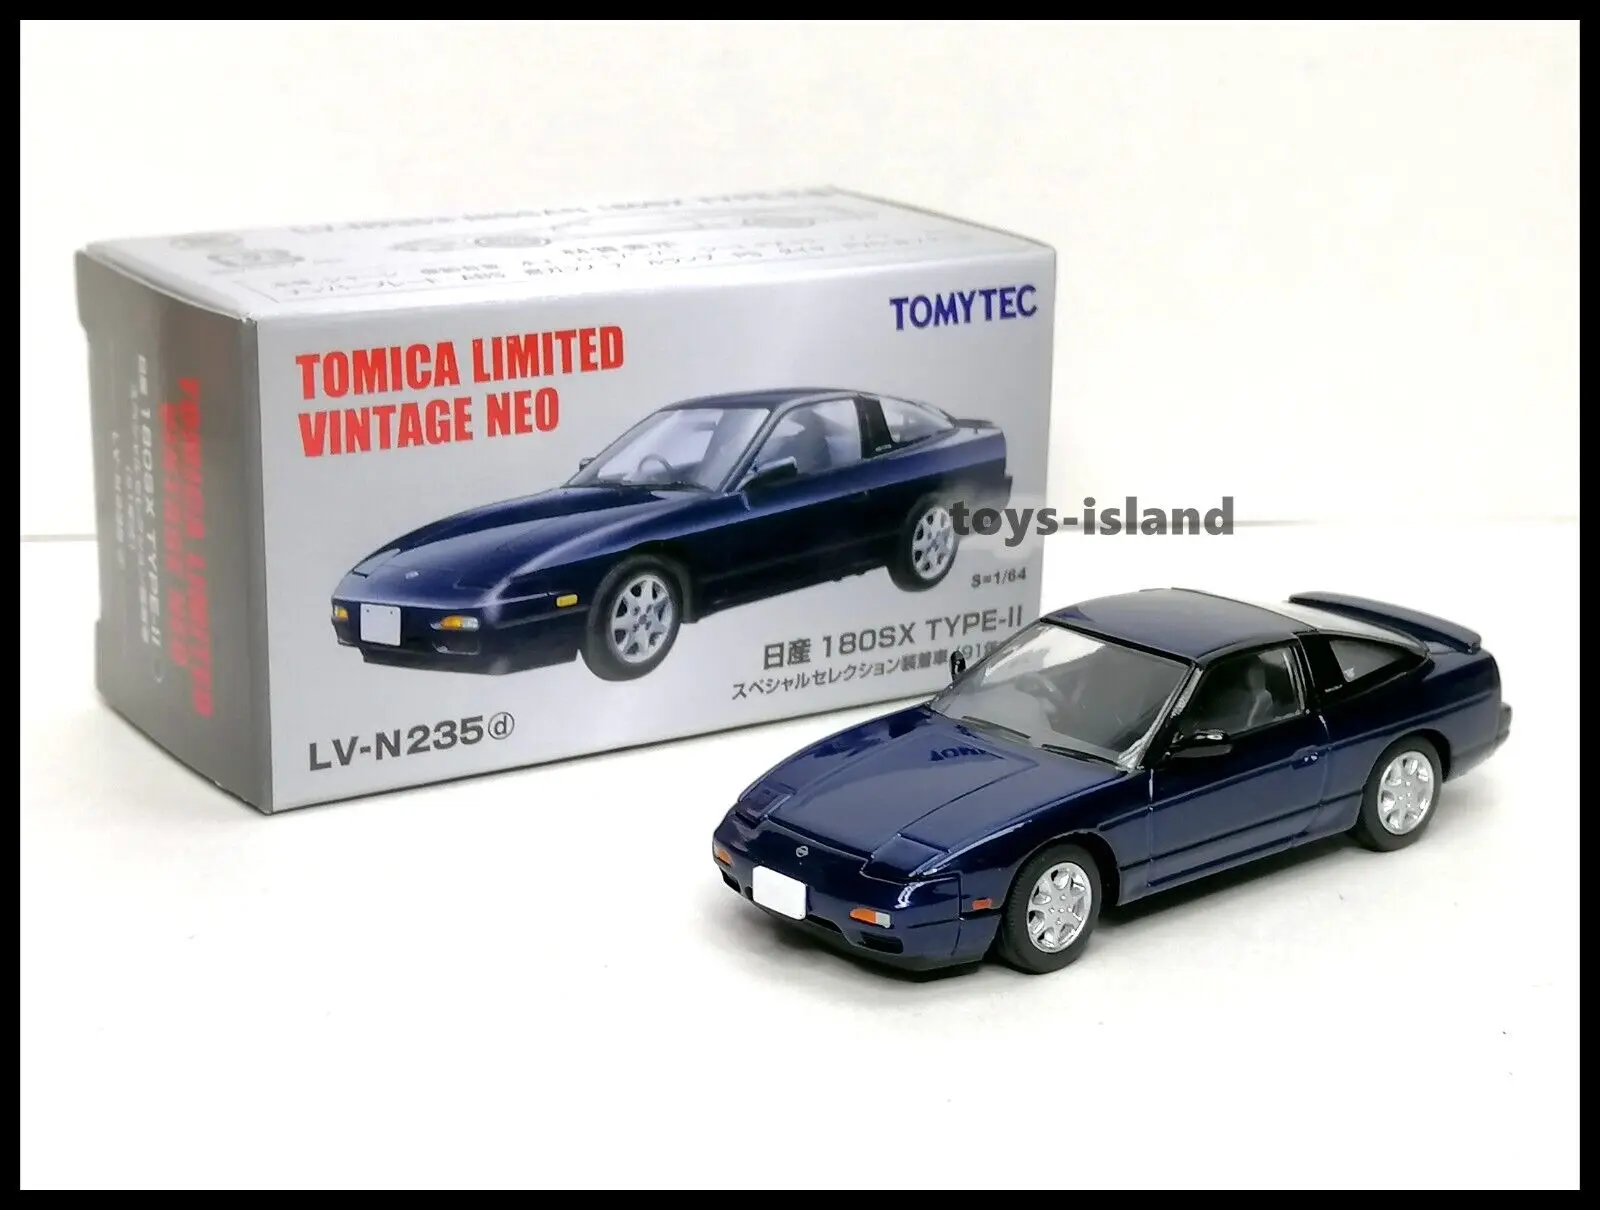 

Tomica Limited Vintage NEO LV-N235d 180SX TYPE-II Silver 1/64 TOMYTEC S1 Diecast Model Car Collection Limited Edition Hobby Toys